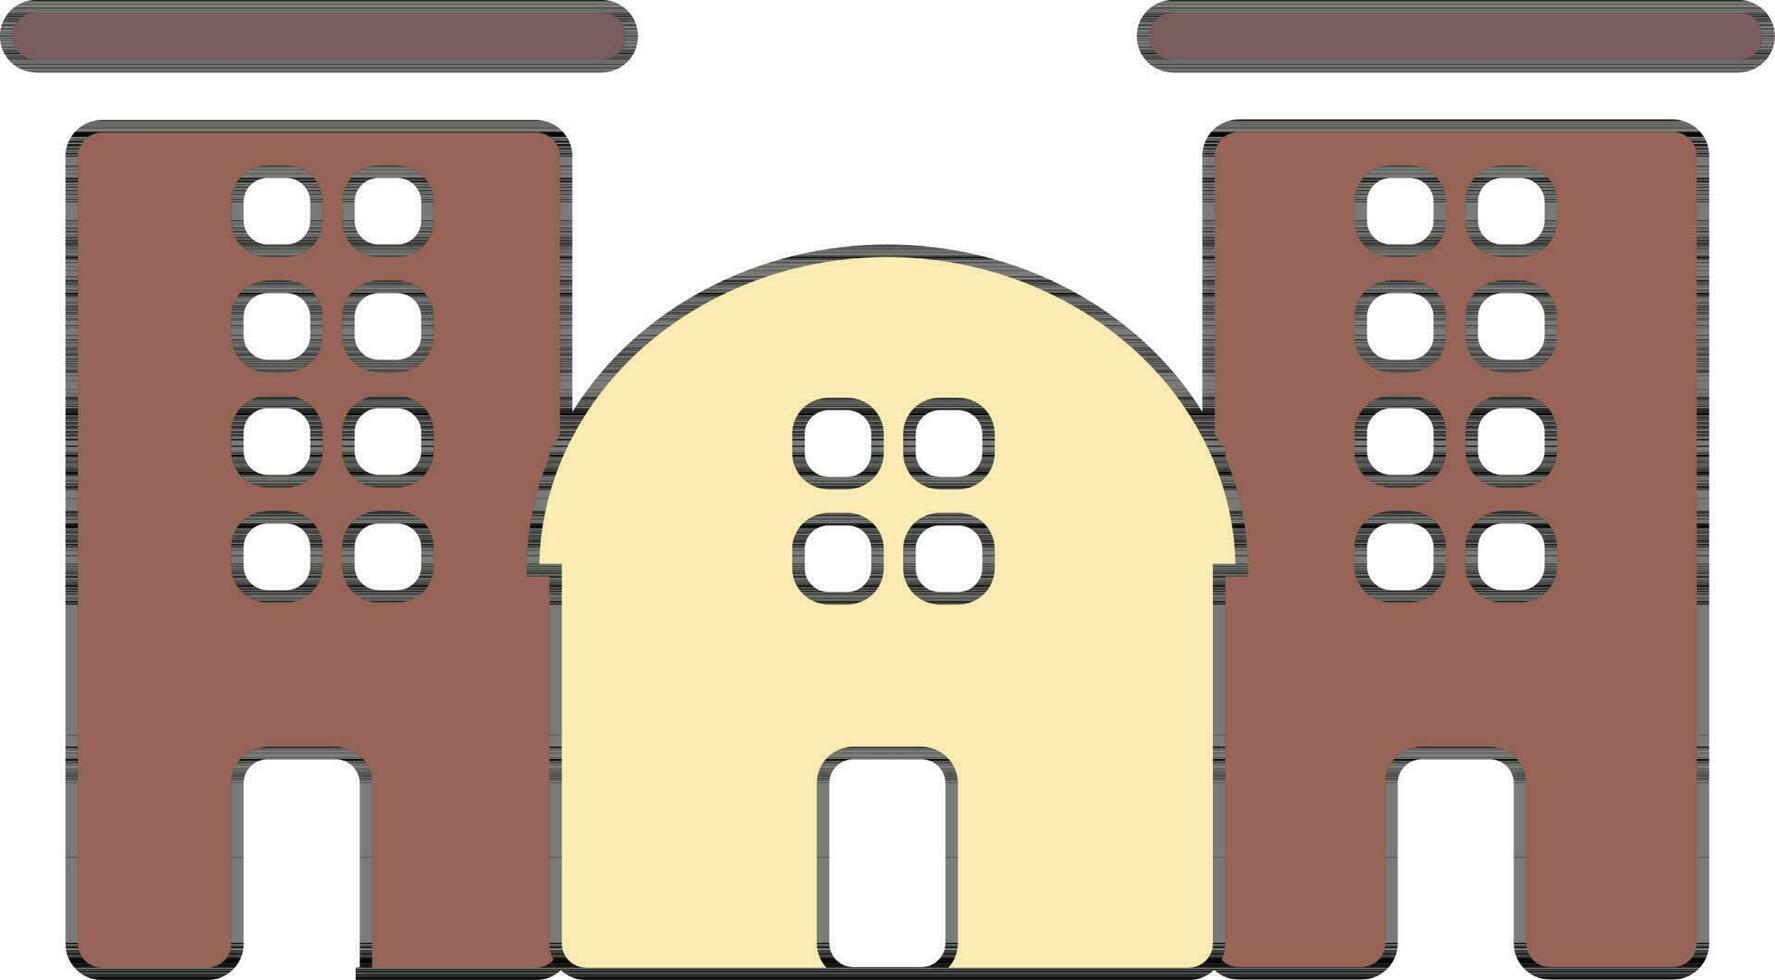 Building in cream and brown color. vector